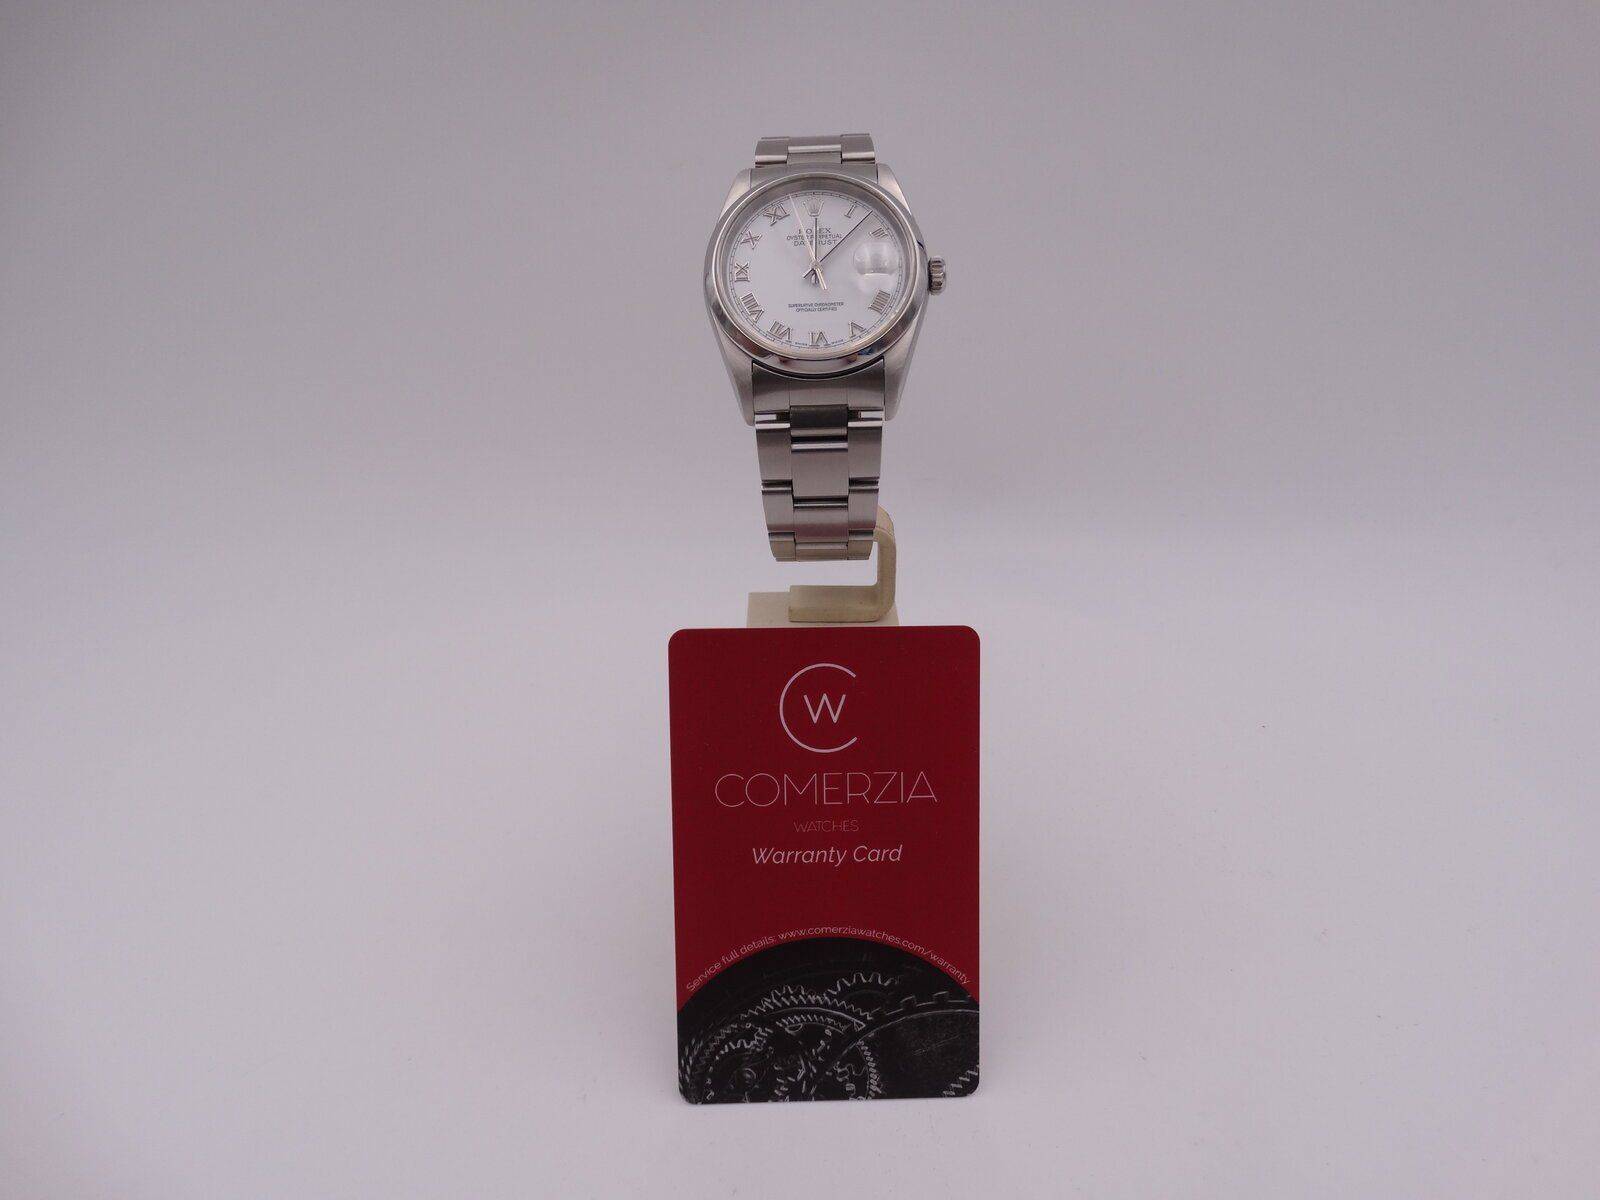 Rolex Oyster Perpetual datejust 16200  05857.JPG